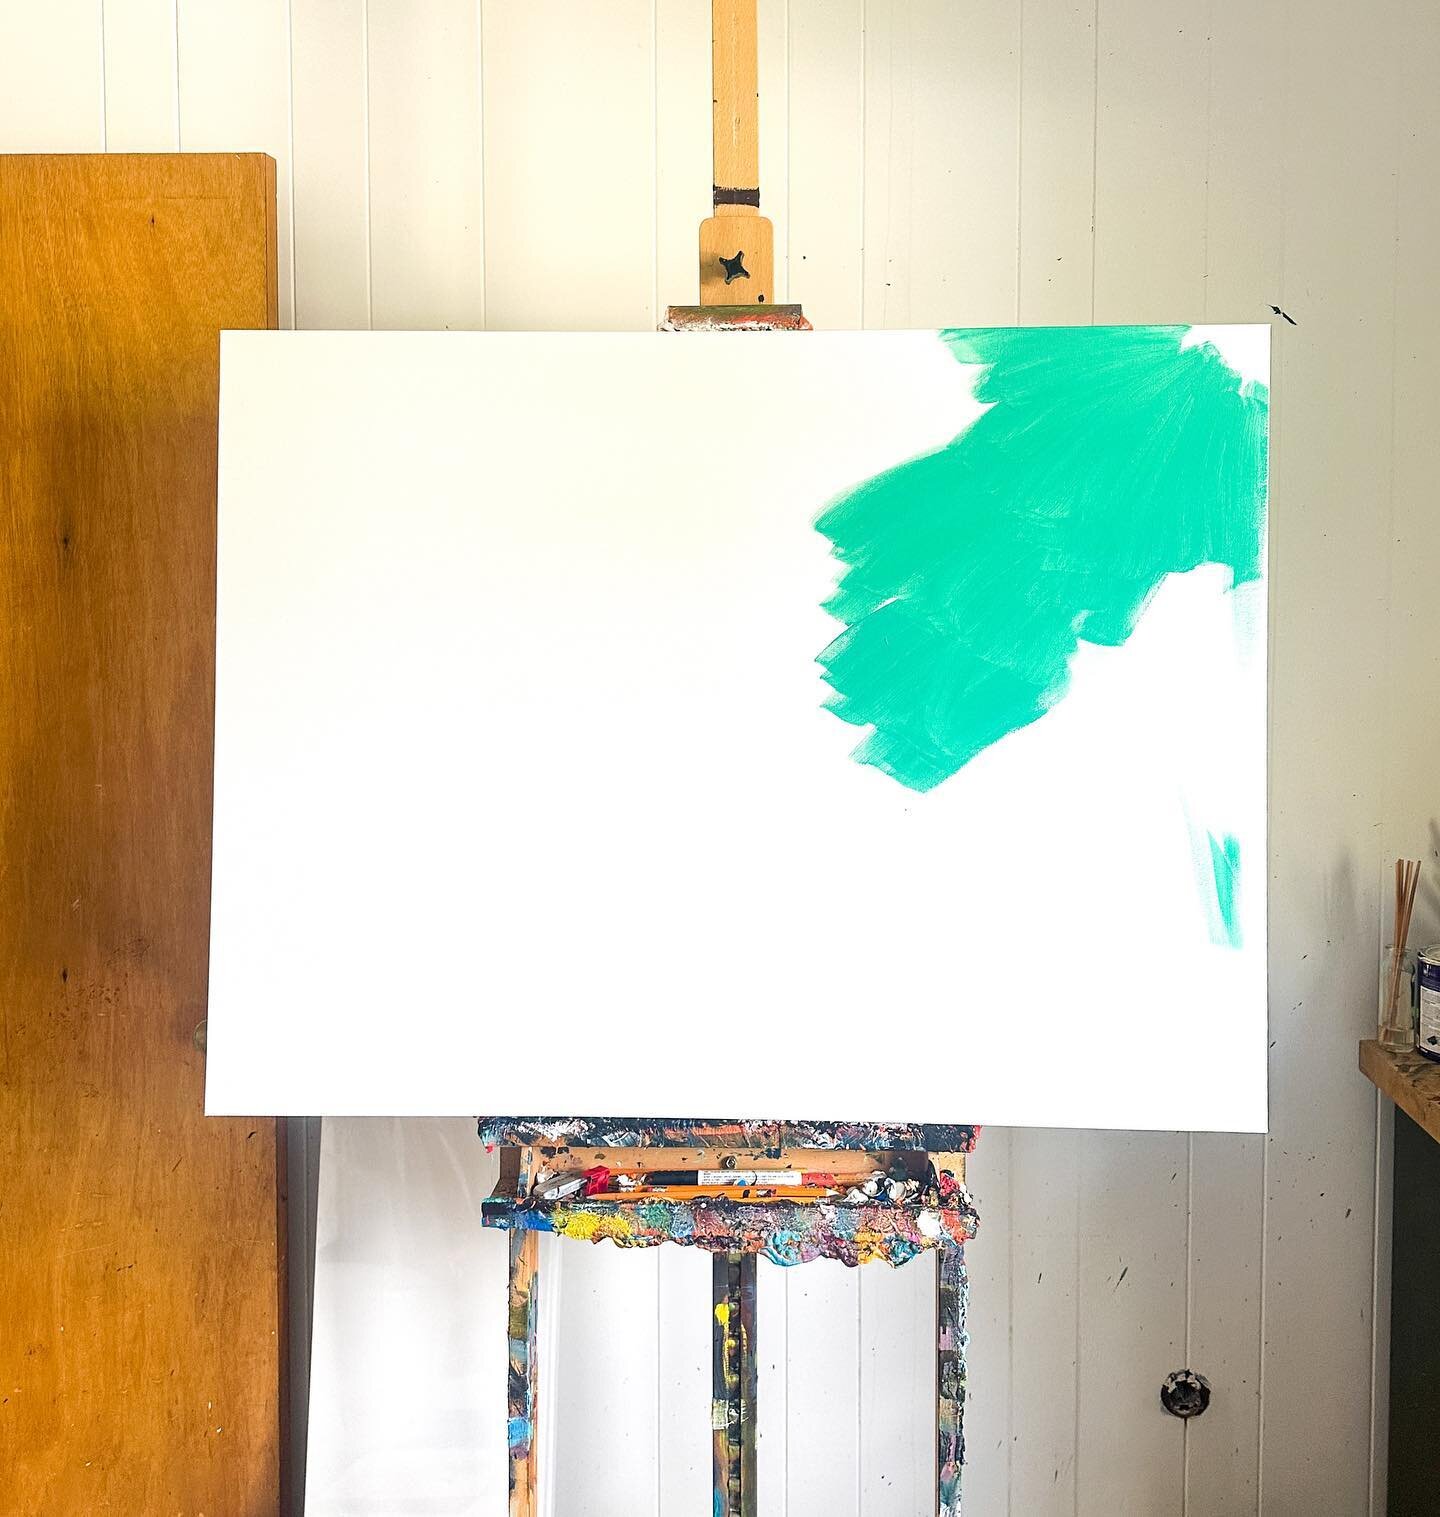 Truth time. I&rsquo;ve been away from my easel for two weeks&hellip; I always wonder if I&rsquo;m going to forget how to push around paint. Those first few brushstrokes always feel like the first ones ever. 😬🫣 Kinda fun to fall in love with it all 